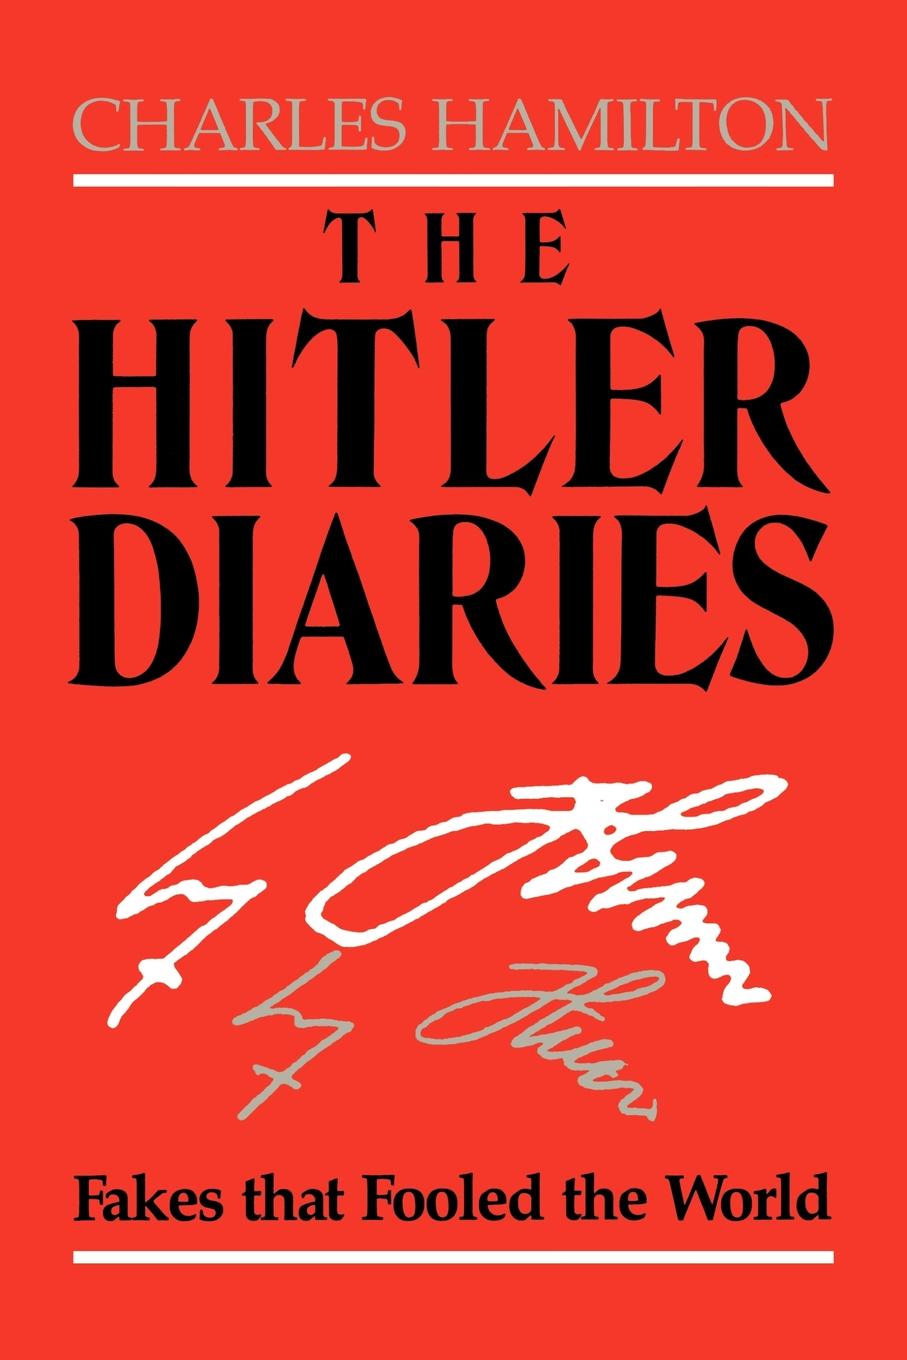 THE HITLER DIARIES THE HITLER DIARIES Fakes that Fooled the World CHARLES - photo 1